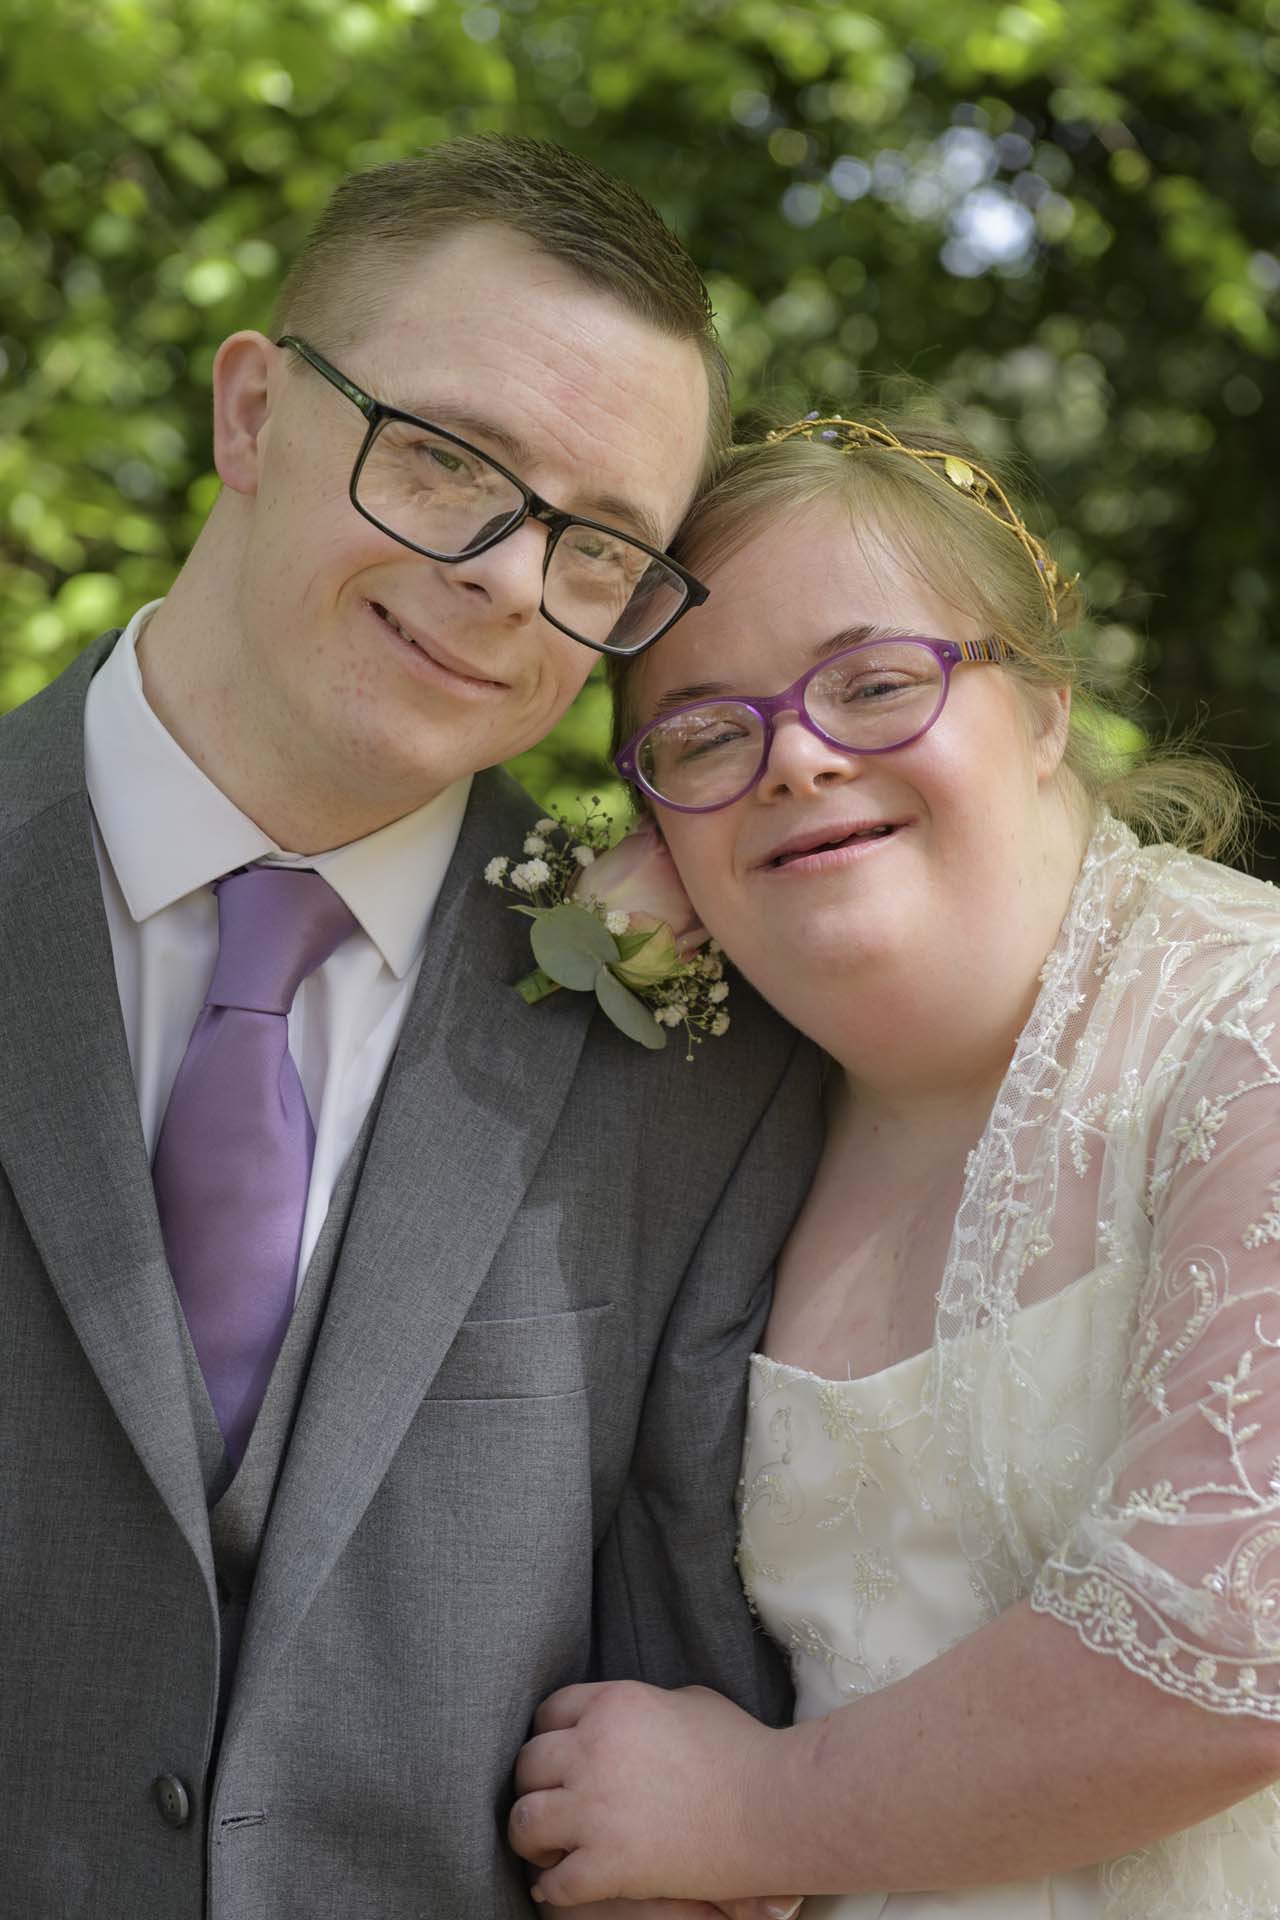 James Heidi wedding Coventry down's syndrome wedding 7 May 22